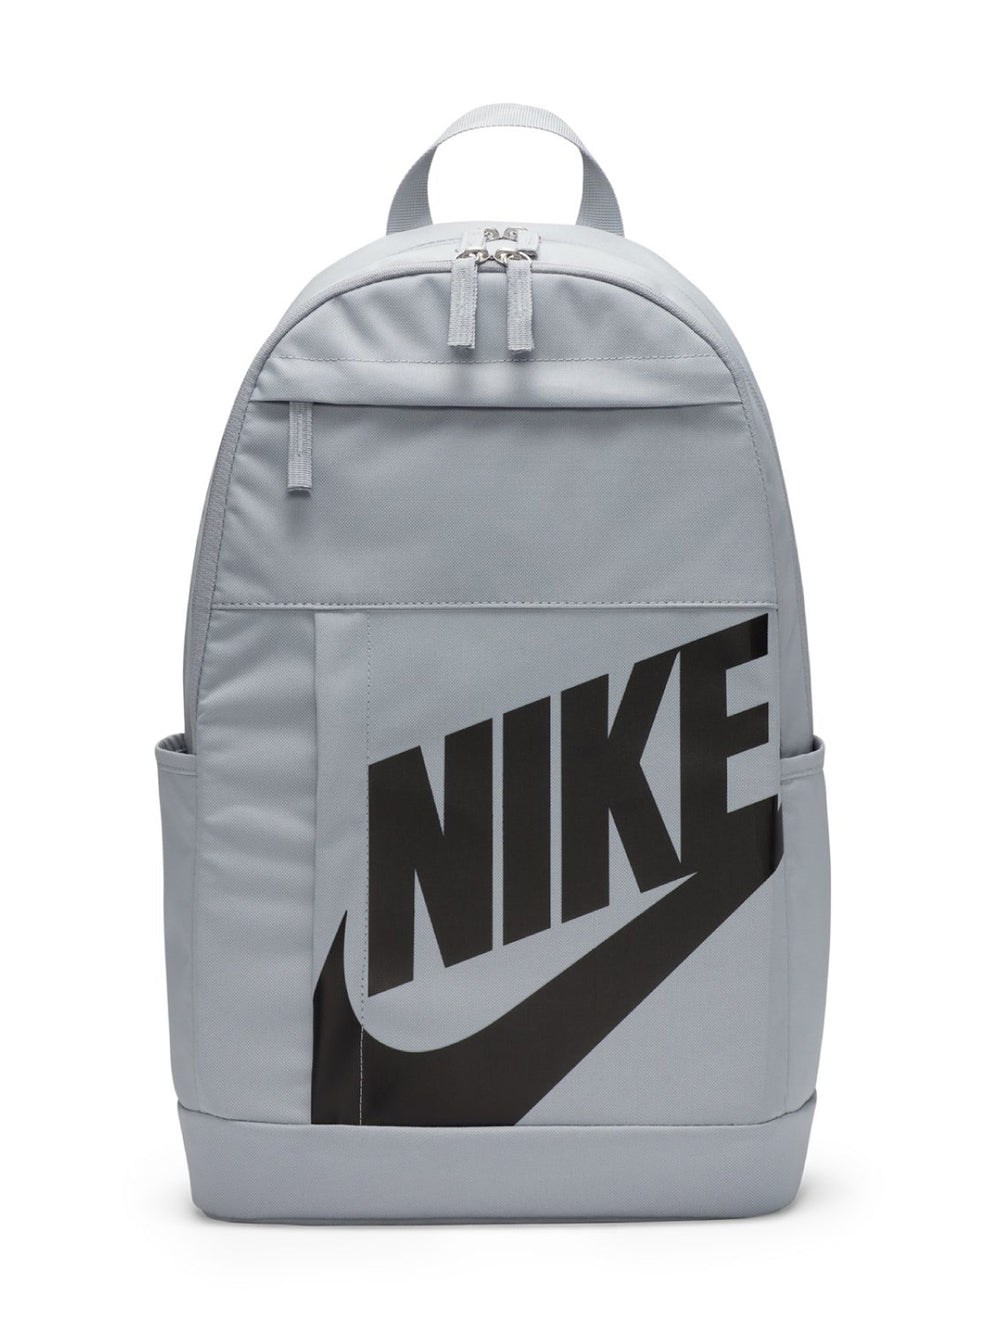 NIKE ELEMENTAL BACKPACK WOLF GREY | Boathouse Footwear Collective